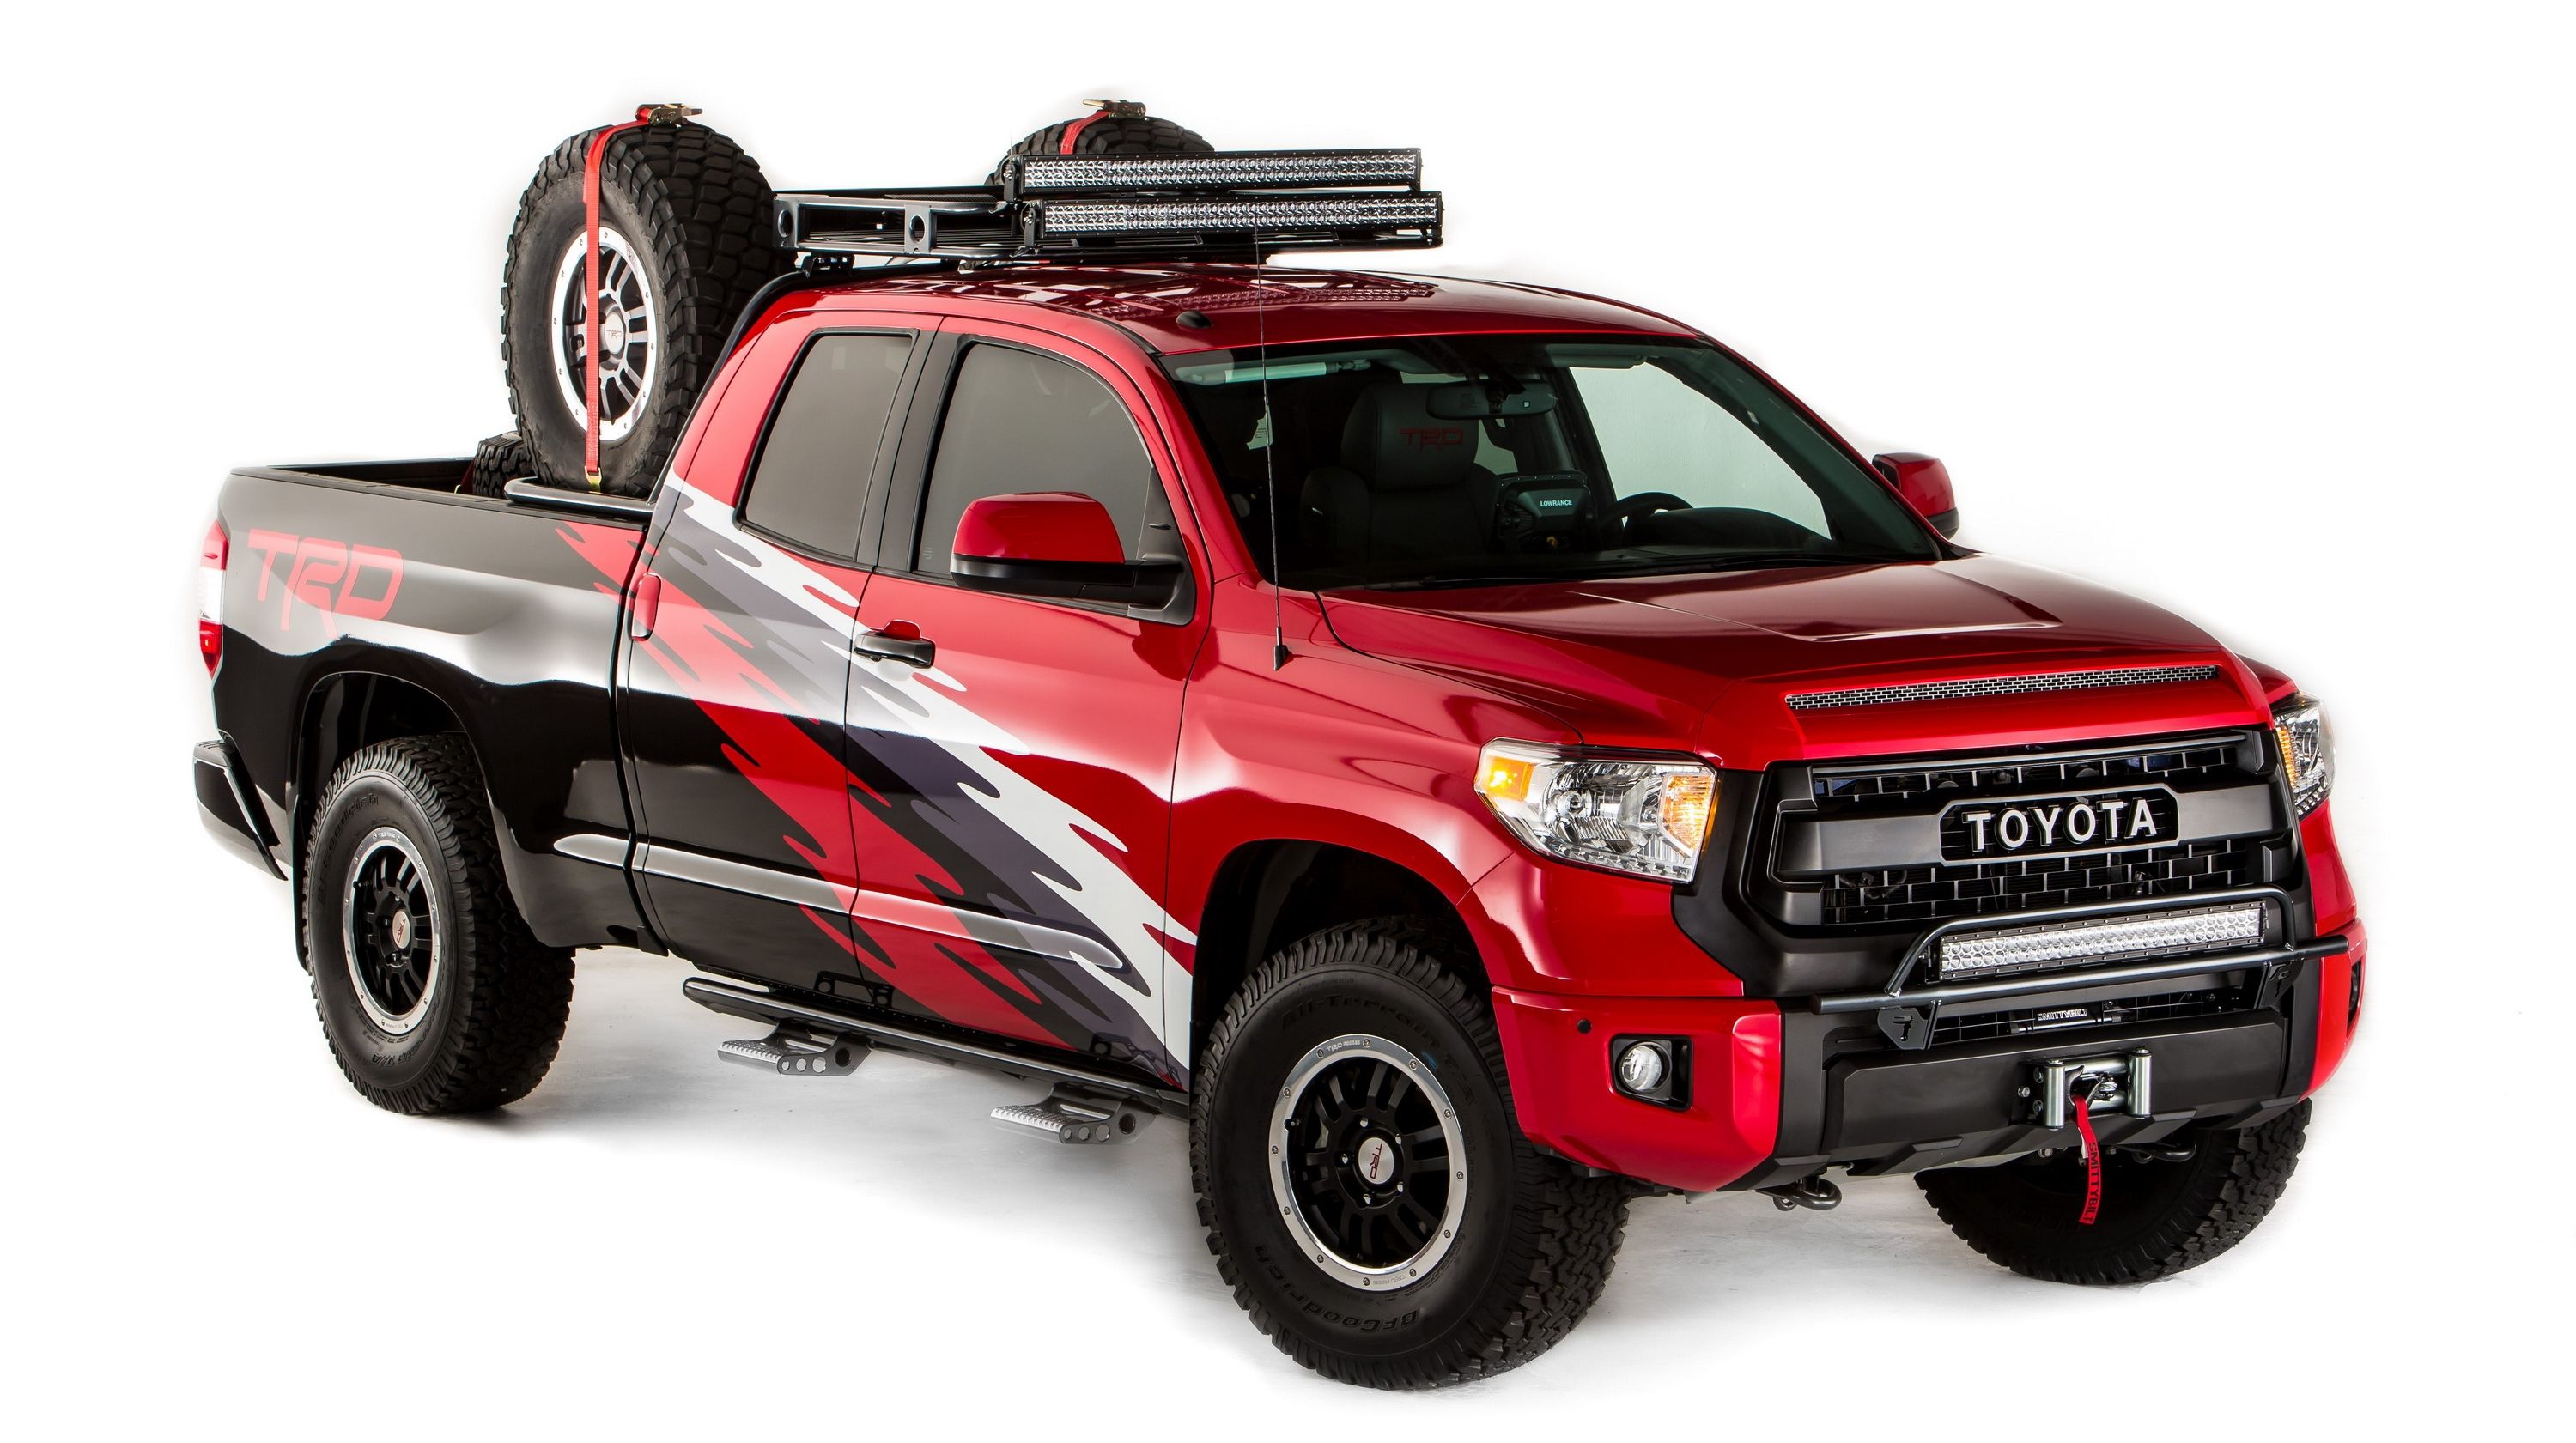  Toyota has a set of chase vehicles for the upcoming Baja 1000, and it's showing off the Tundra version at SEMA. 